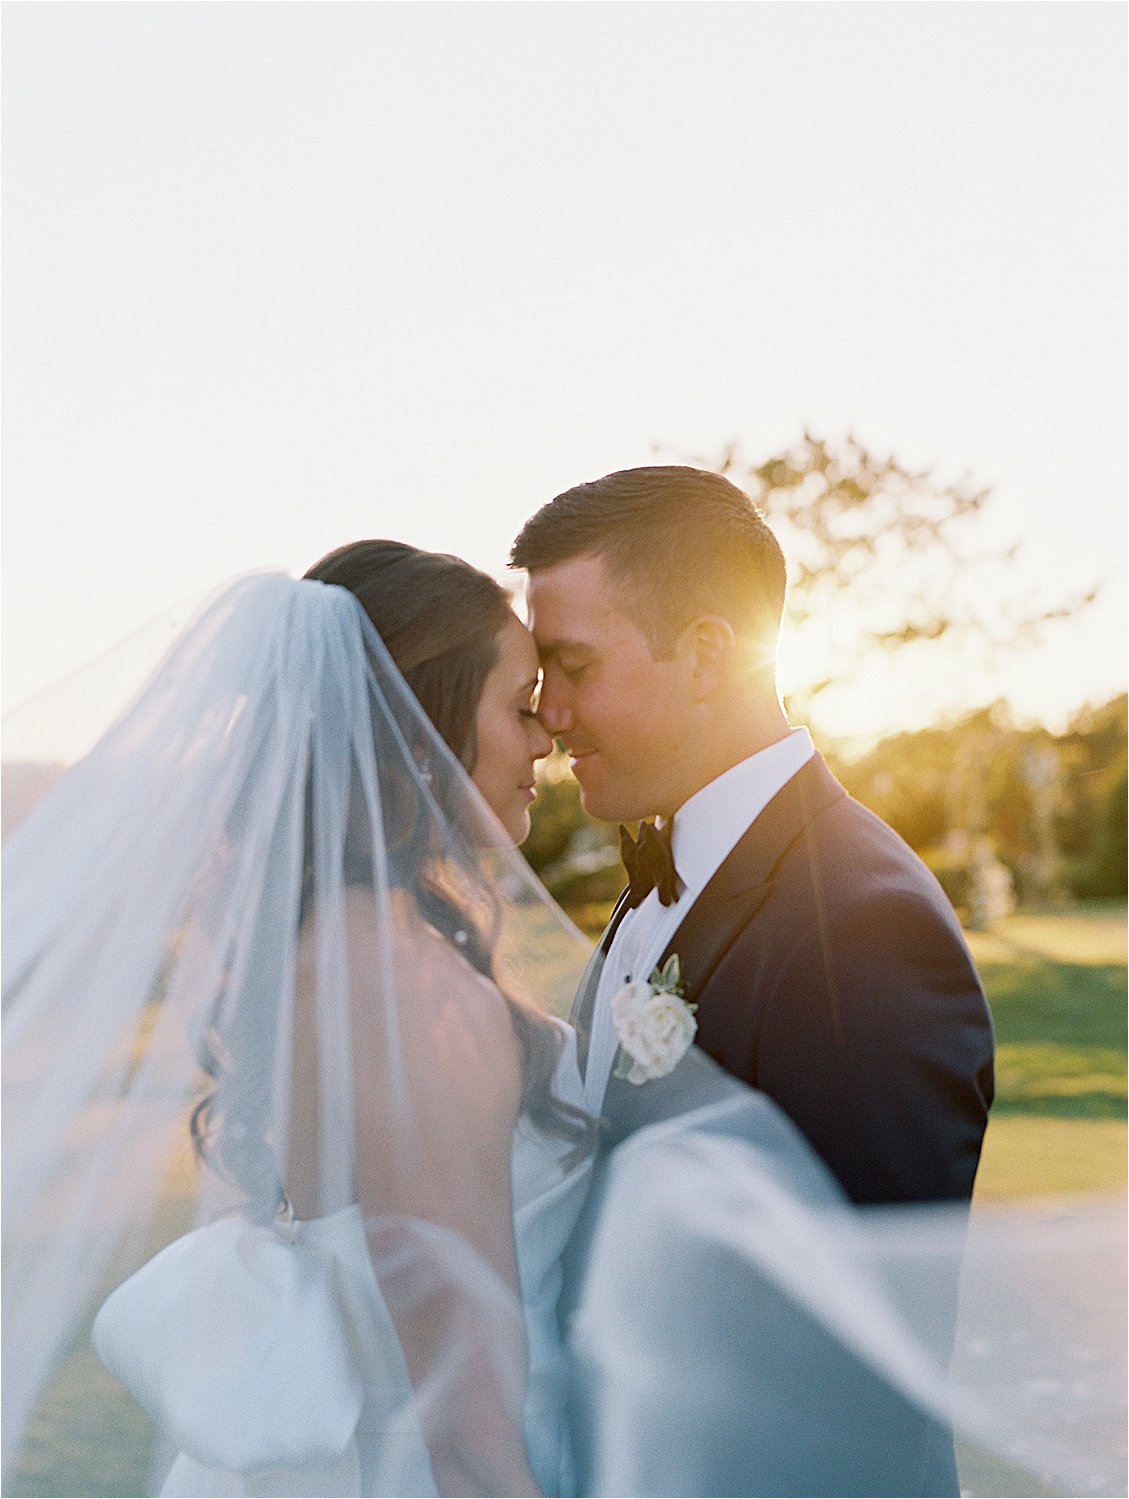 Bride and Groom during sunset portraits at Fenwick Island, Delaware Wedding with Destination Wedding Photographer, Renee Hollingshead